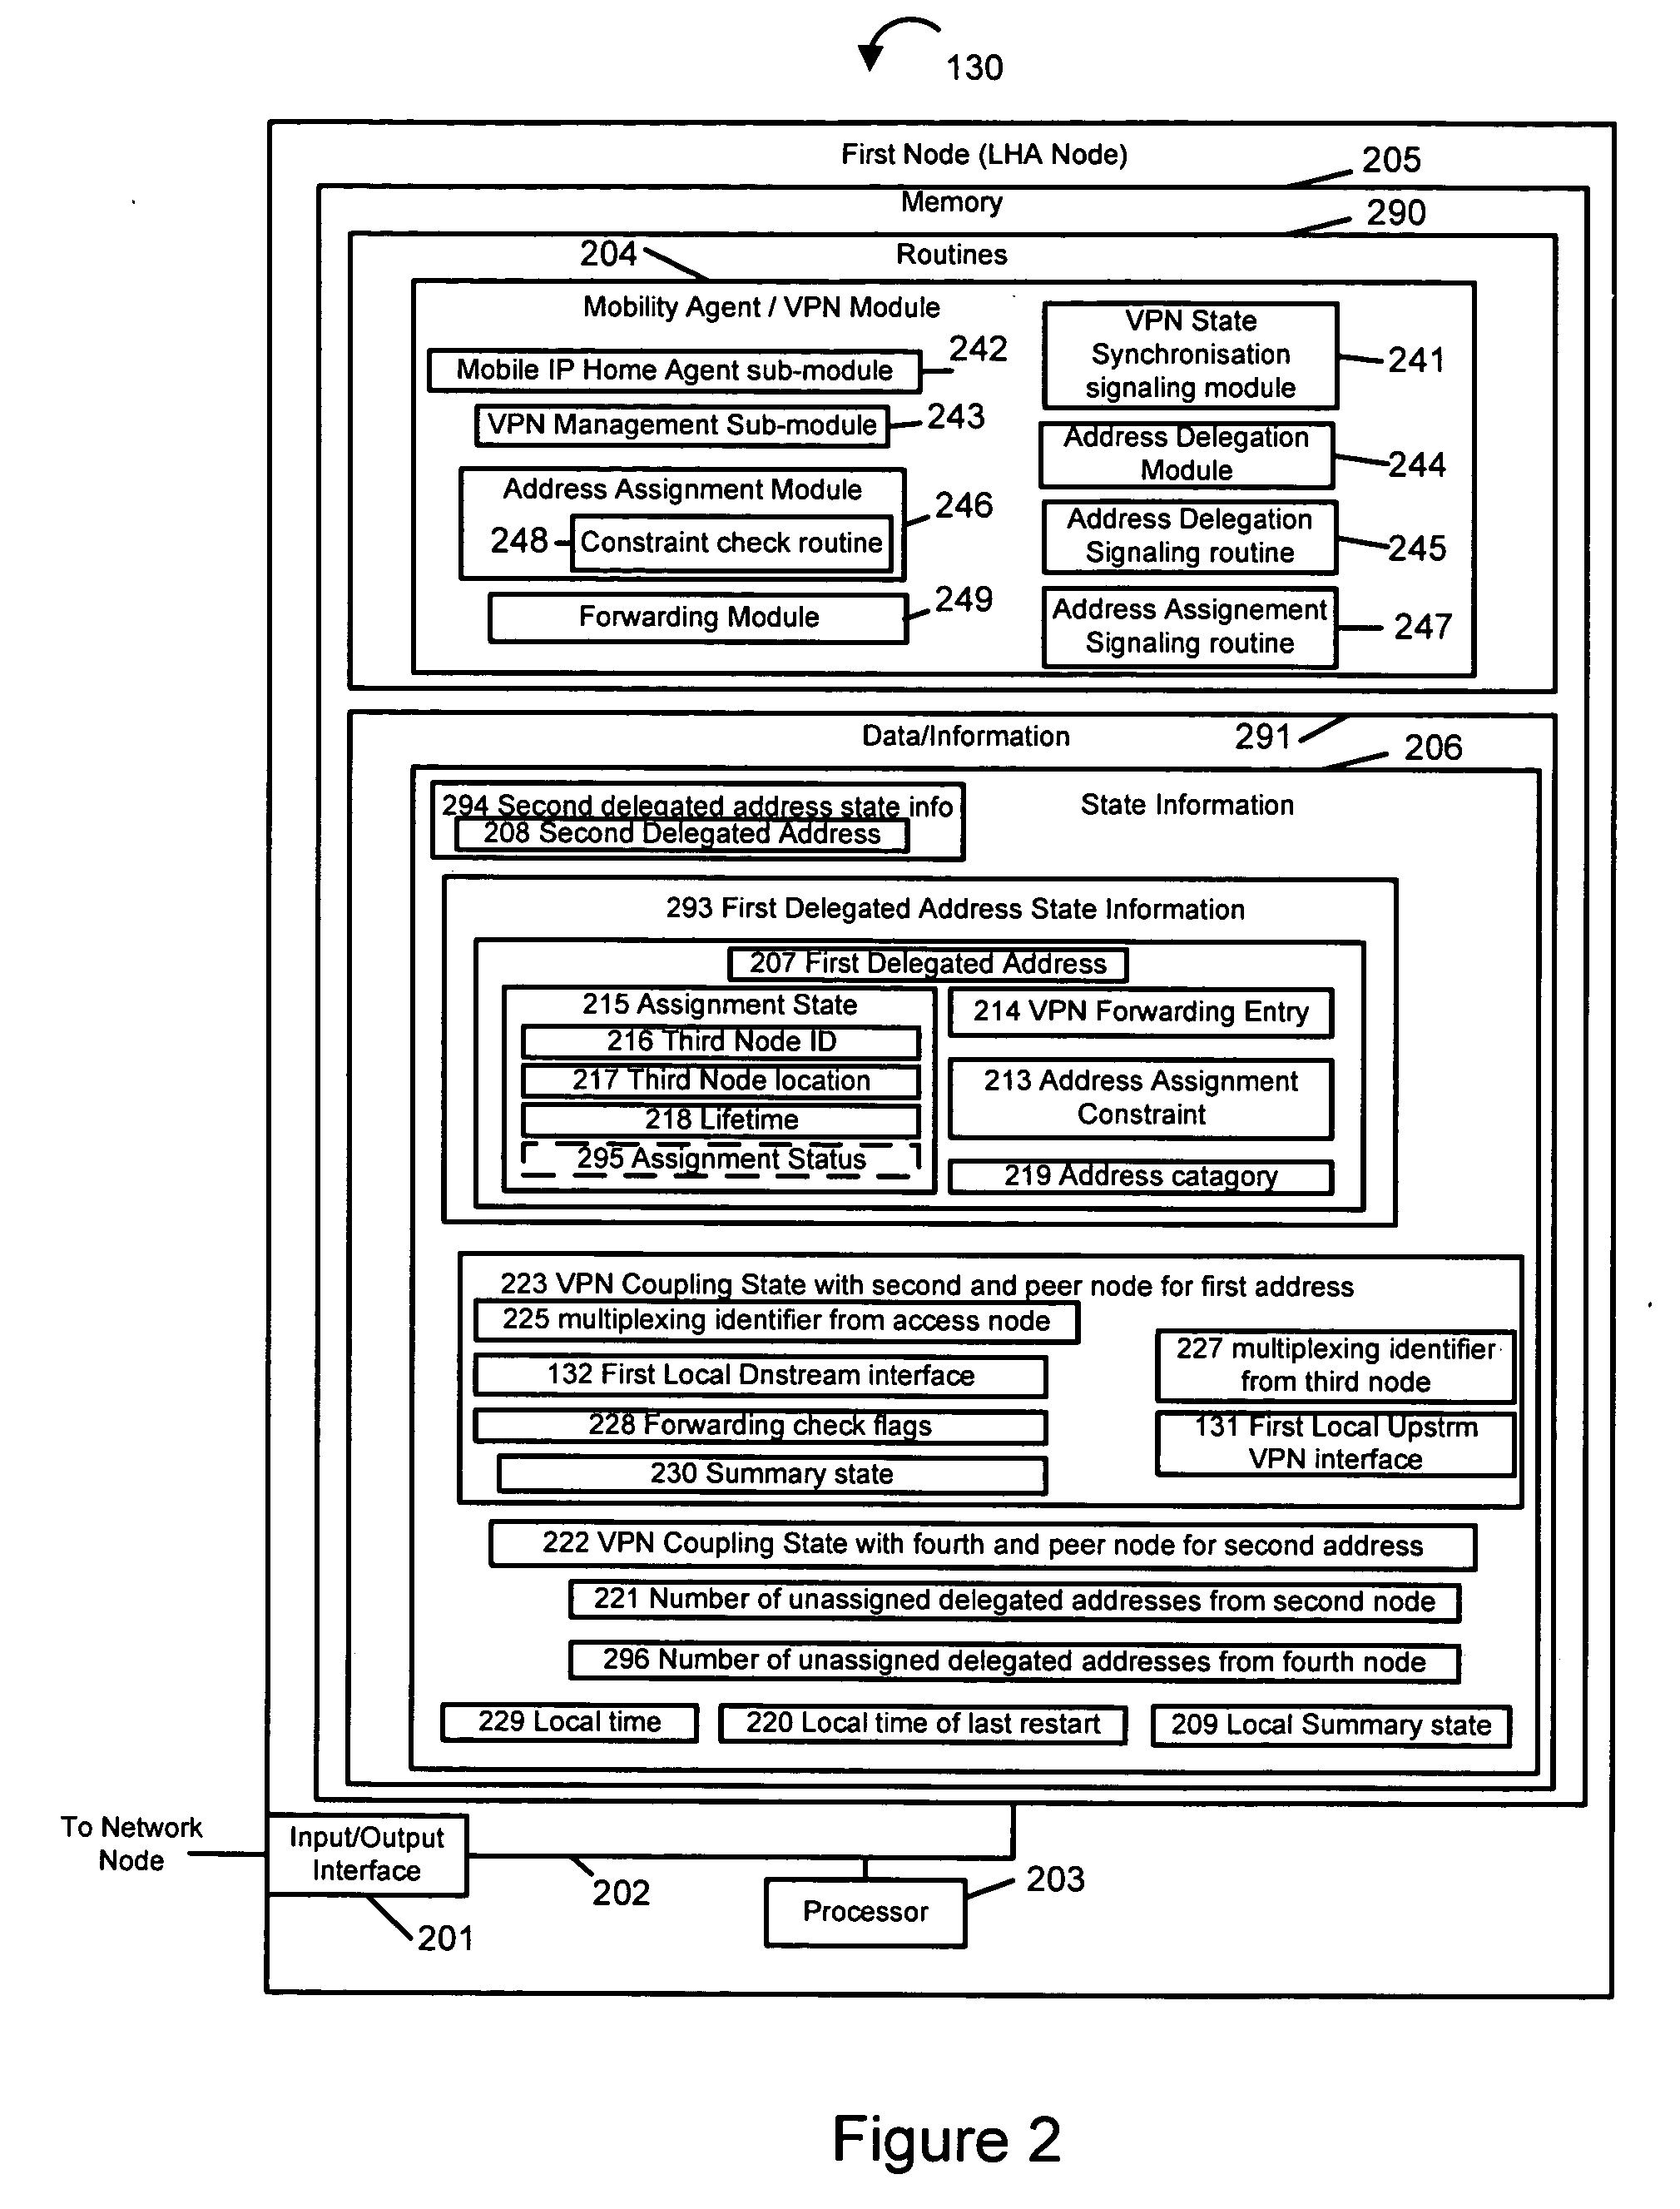 Methods and apparatus for efficient VPN server interface, address allocation, and signaling with a local addressing domain